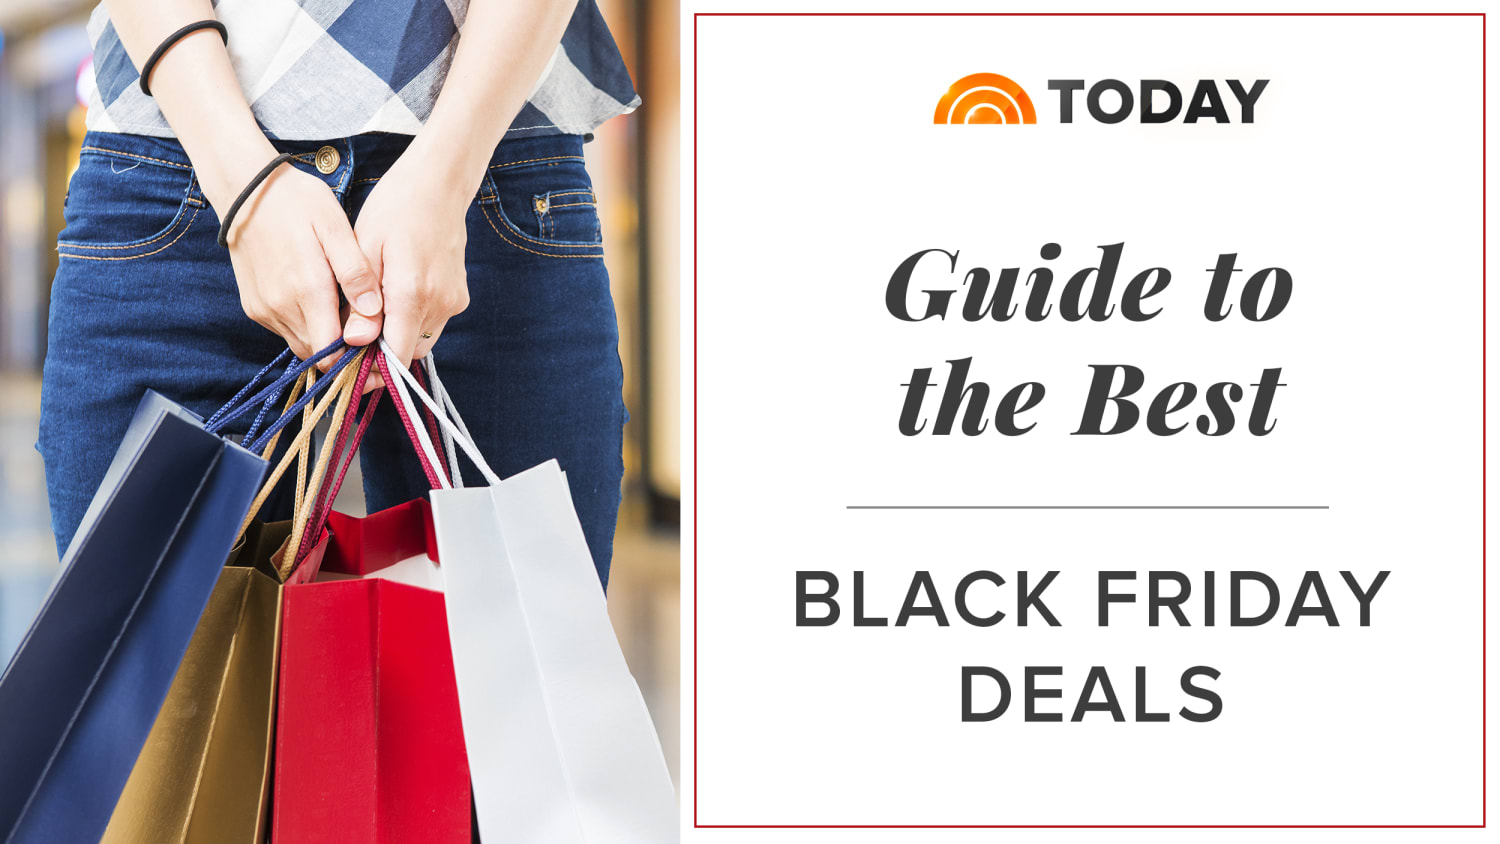 Best Black Friday Deals on Amazon, Target and more 2017 - TODAY.com - Where The Best Deals For Black Friday